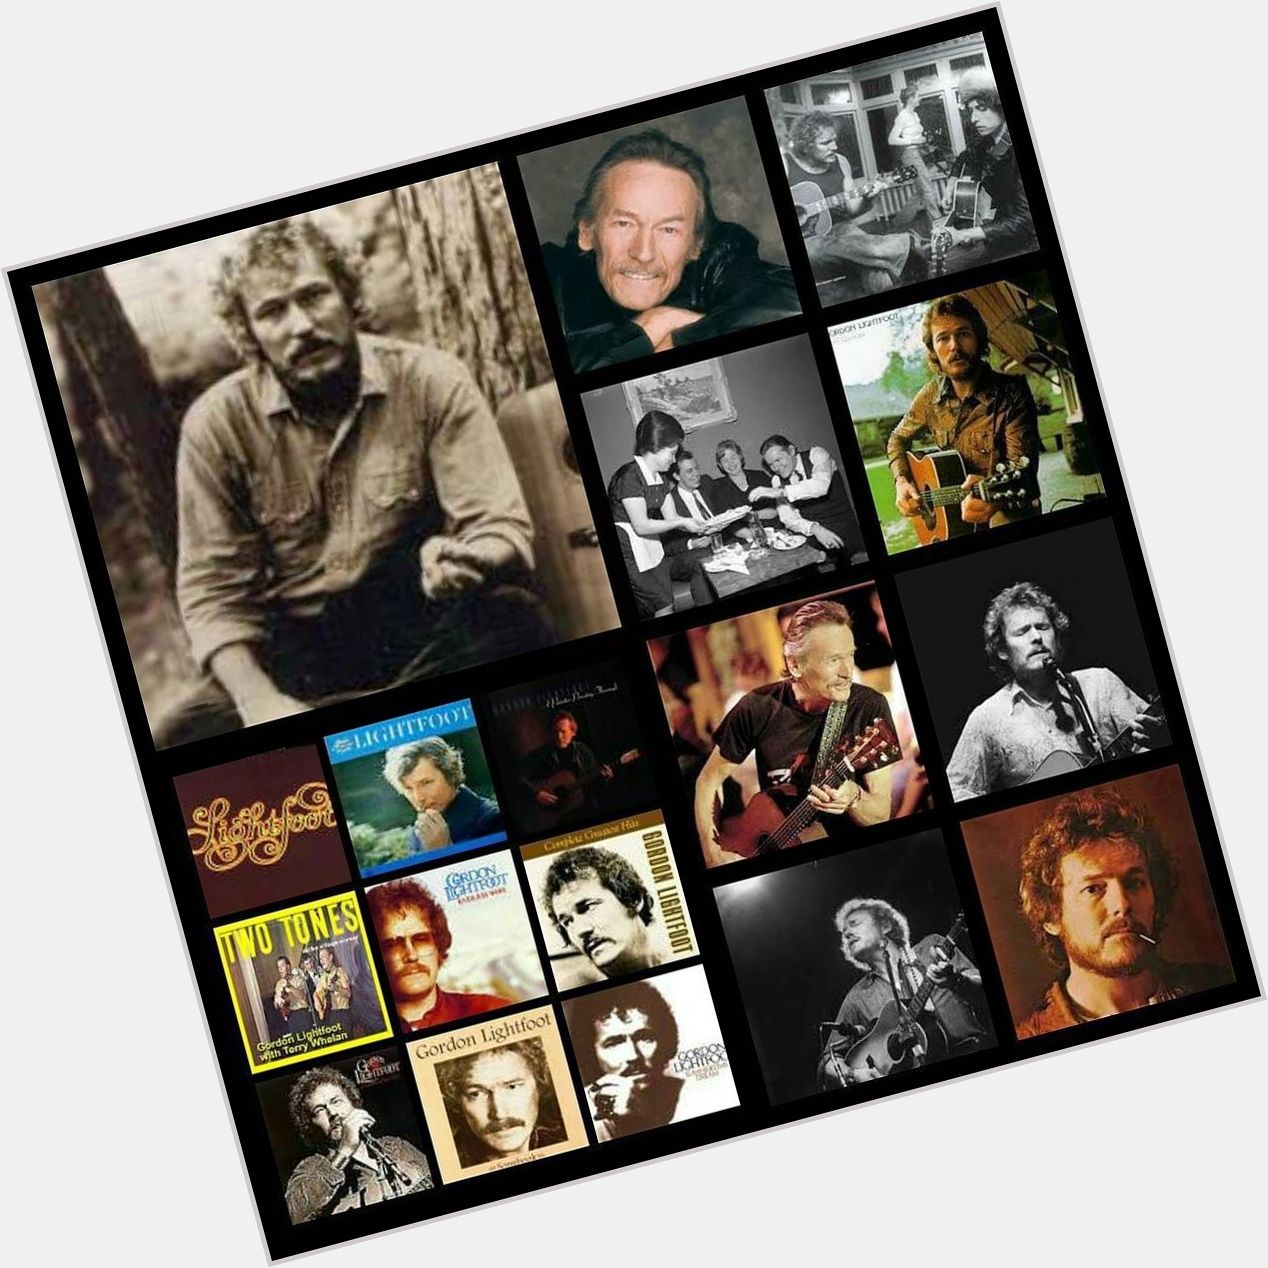  :  | Happy Birthday Wishes To  Singer - Songwriter Gordon Lightfoot  Who Was Bor 